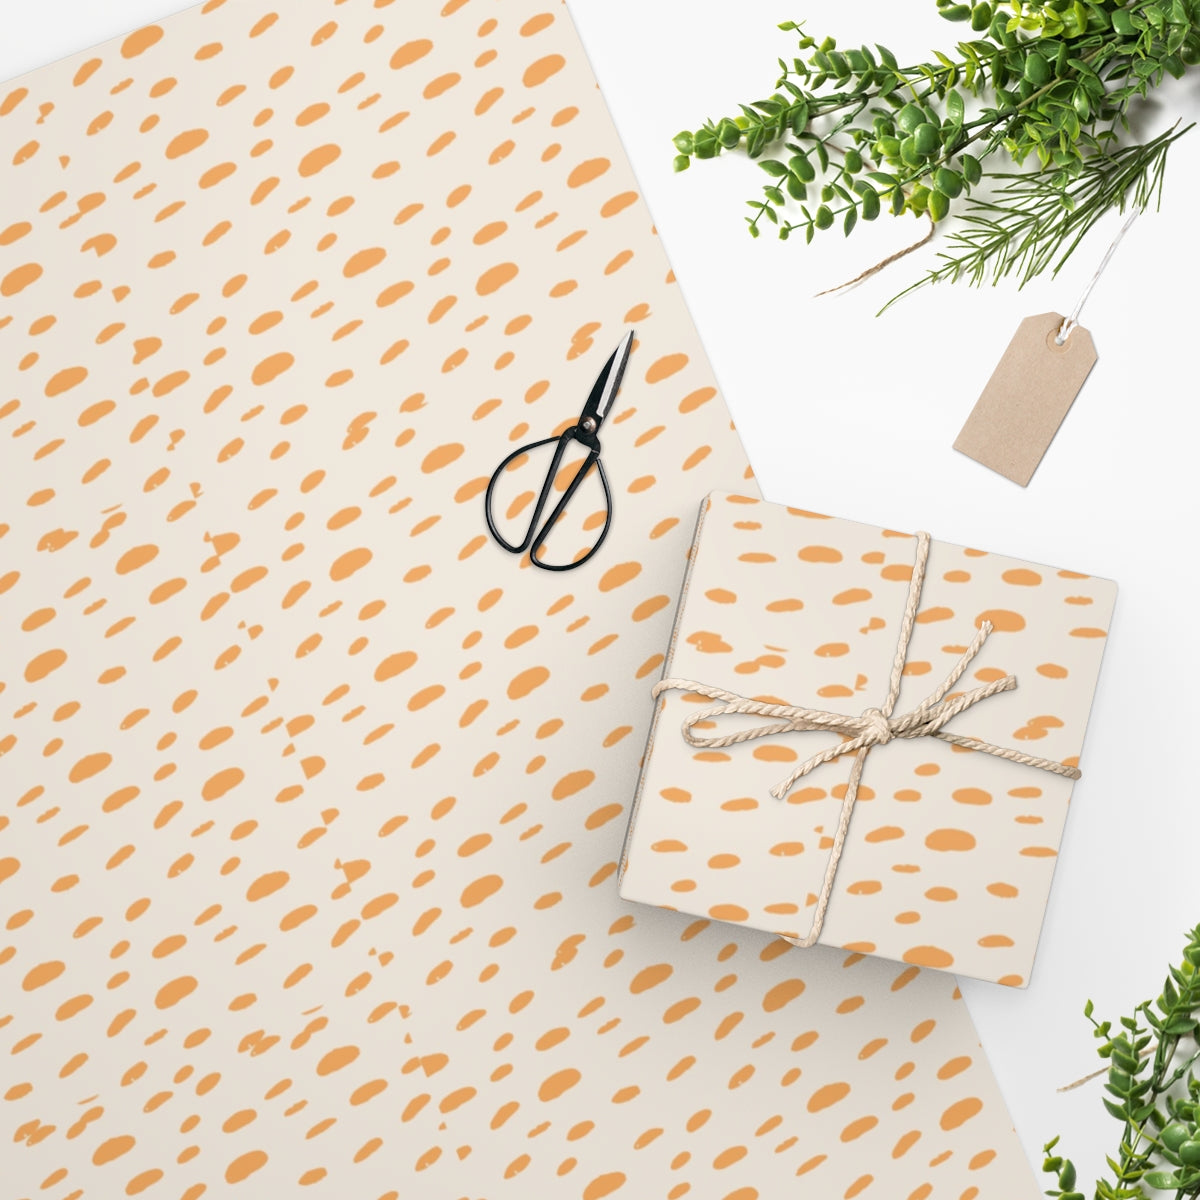 Luxury Gift Wrap - Copper Polka Dot - Wrapping Paper